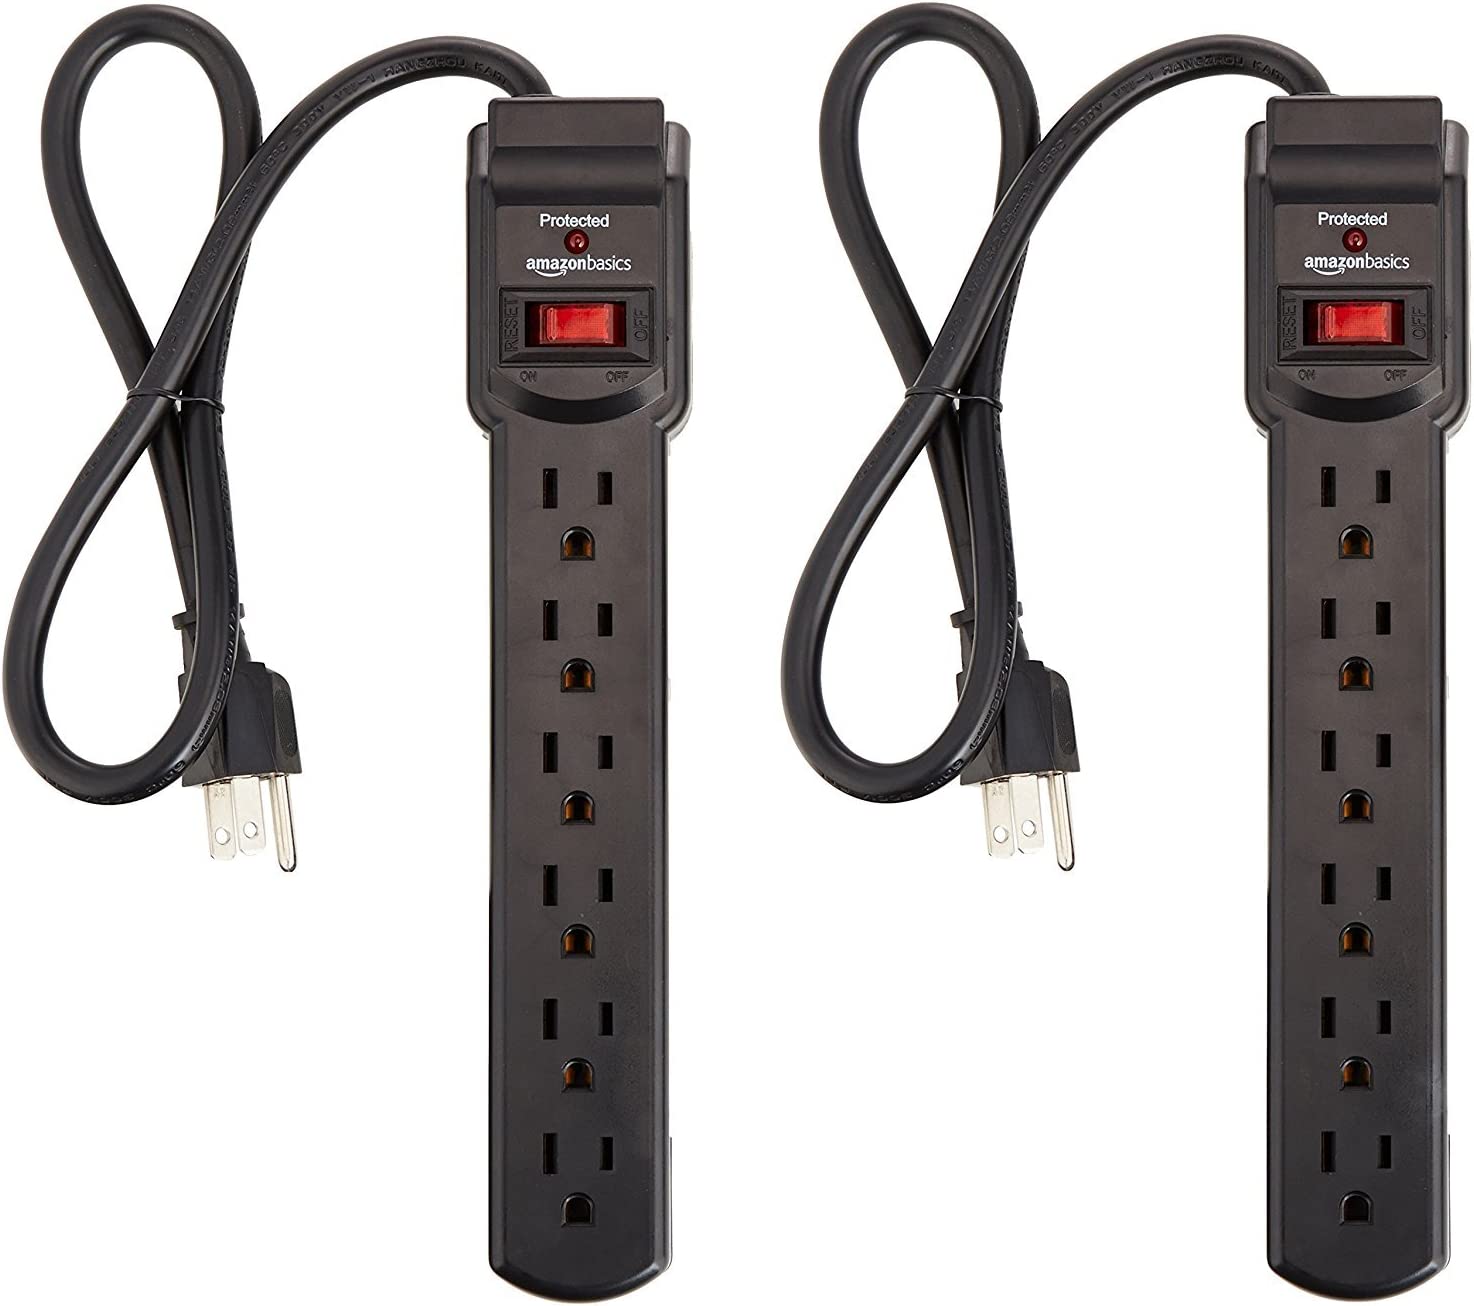 Amazon Basics 6-Outlet, 200 Joule Surge Protector Power Strip, 2 Foot, Black - Pack of 2